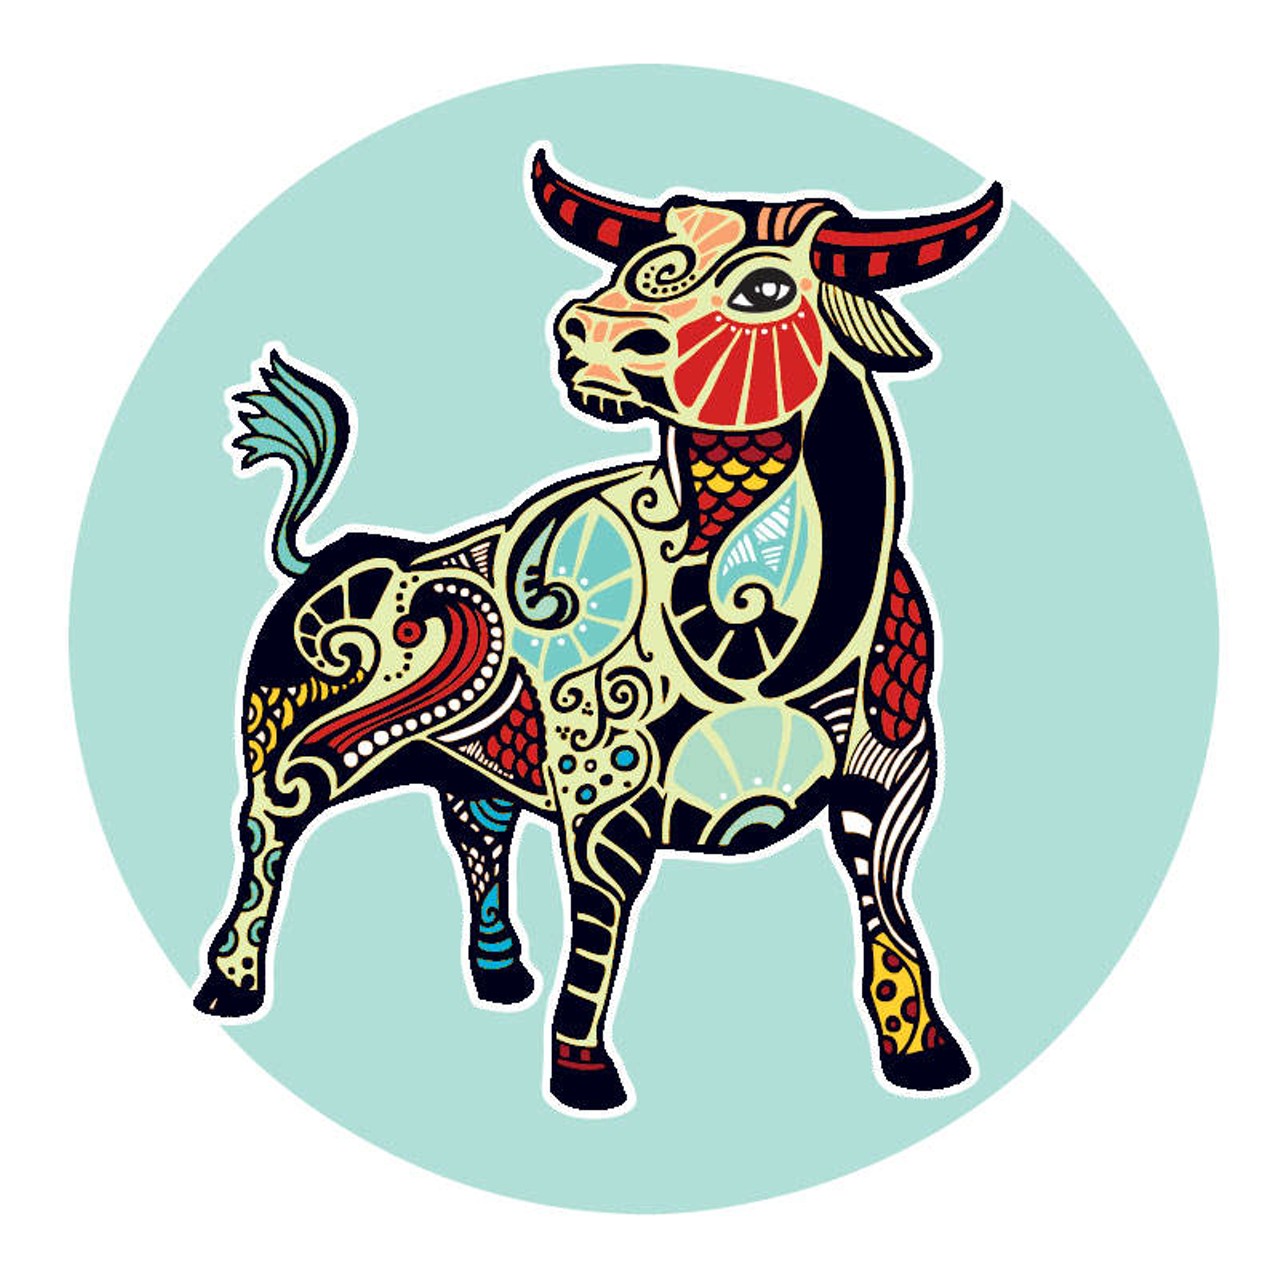 TAURUS (April 21 -May 20): 
The company you keep says a lot about where you&#146;re at with yourself. It looks like you&#146;ve surrounded yourself with people who make it easy for you to remain in denial. I hate to say it but at a time when you need a boot in the ass, it seems crazy to hang out only with those who don&#146;t challenge you. You&#146;re already totally aware of the fact that you need a shot in the arm, or something to bounce you out of the sense of complacency that&#146;s stunting your growth.Waking up is hard to do, but you&#146;re at a place in your life where everything depends upon it.